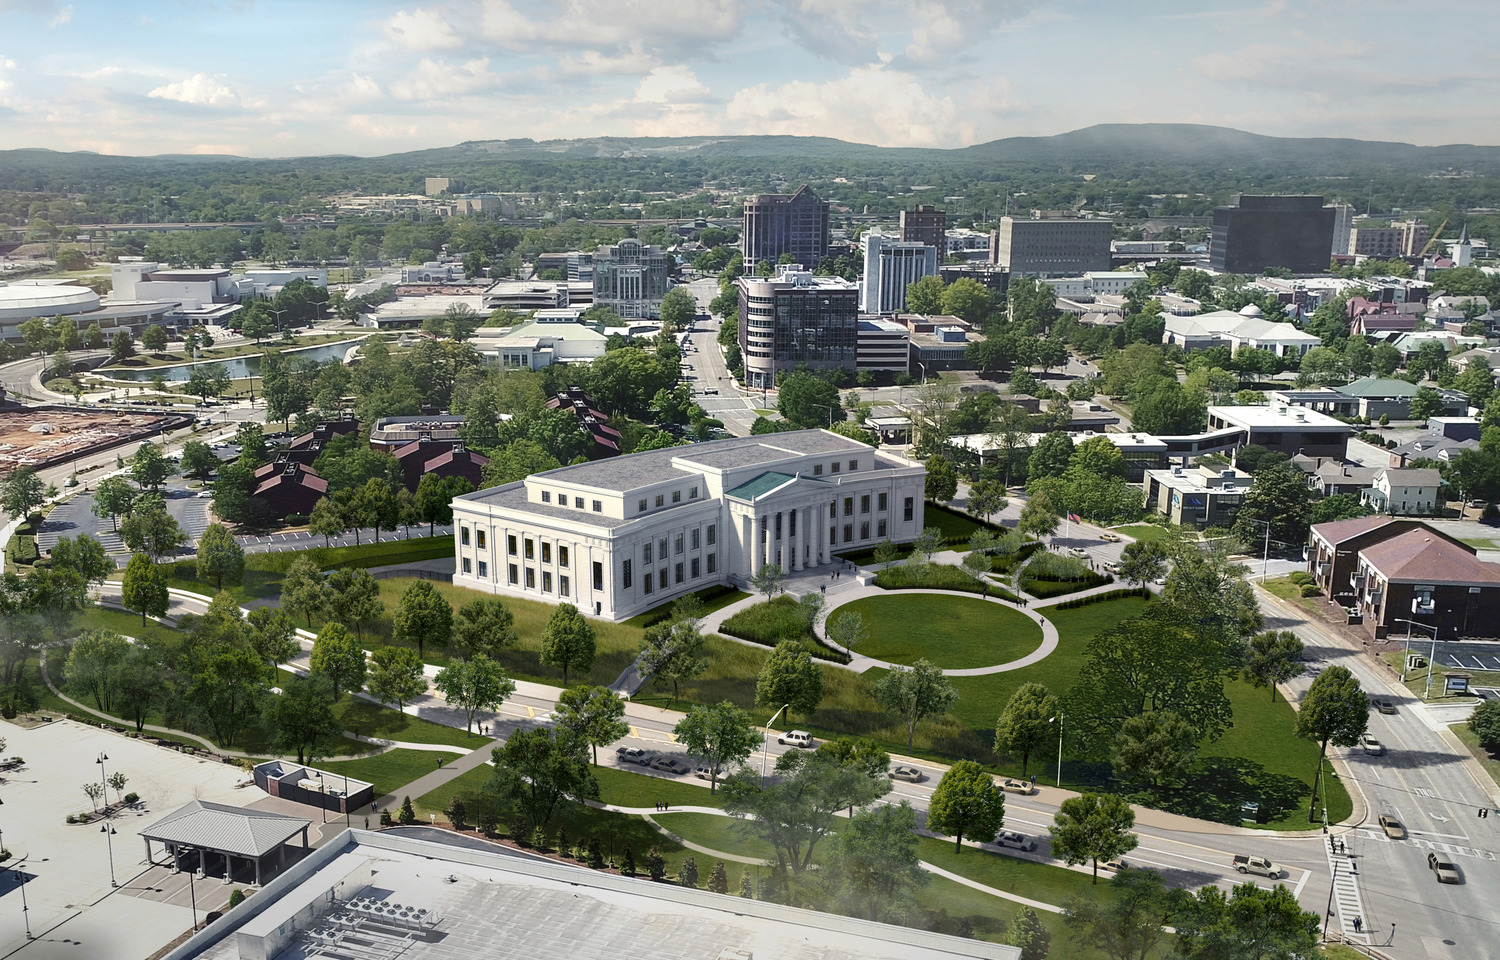 Ch 4 - page 7

U.S. Courthouse Huntsville - RENDERING